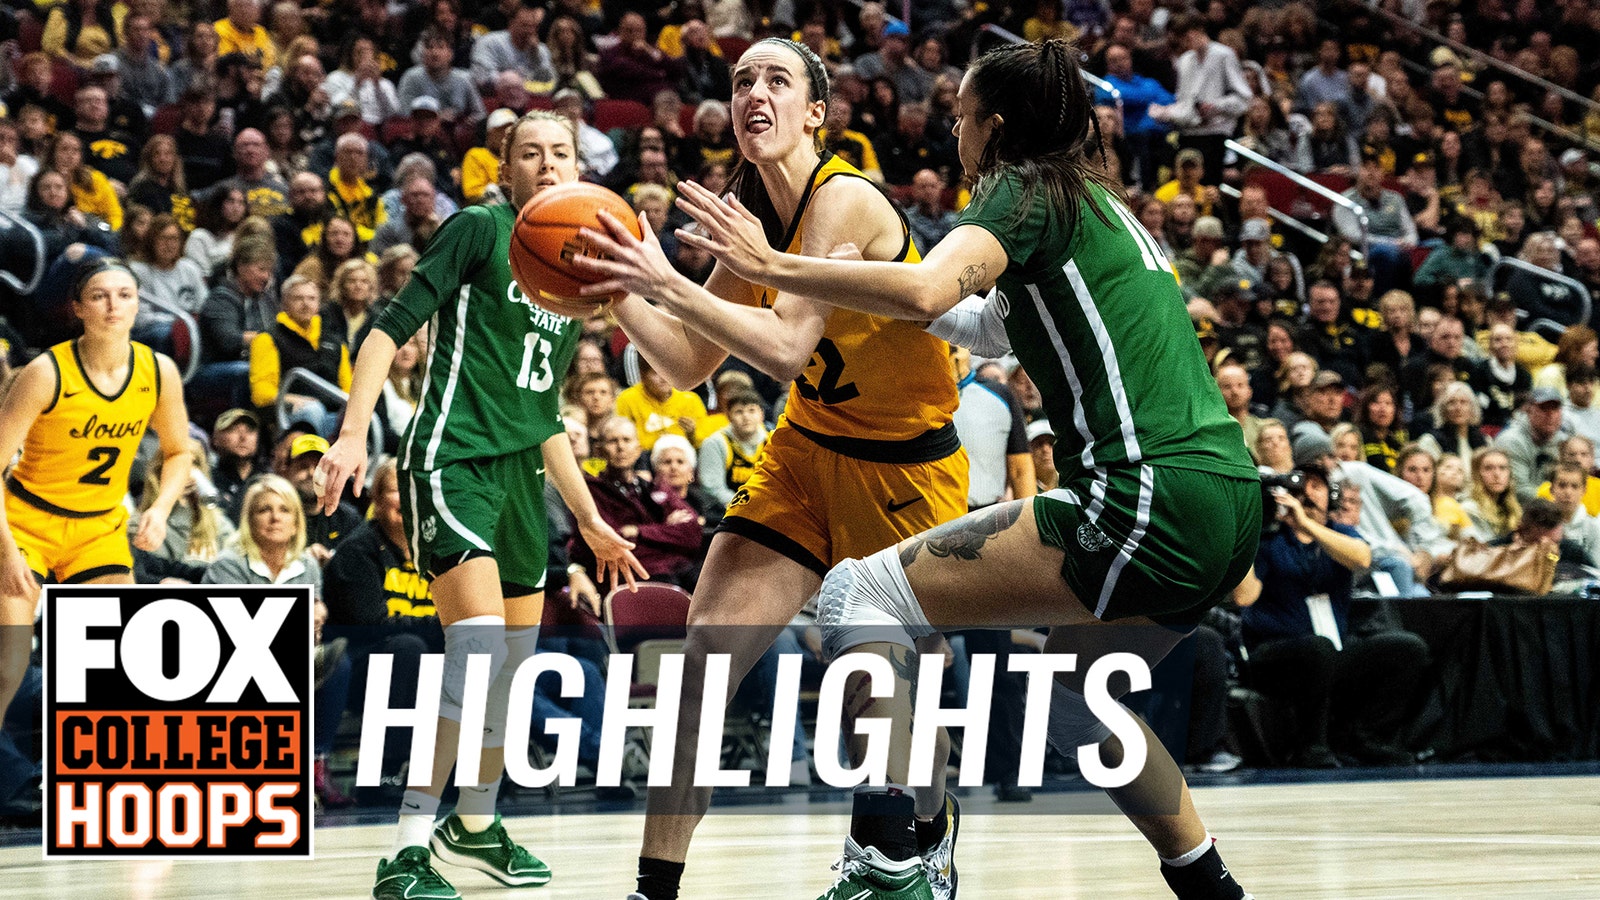 Caitlin Clark drops 38 points in Iowa's 104-75 victory over Cleveland State